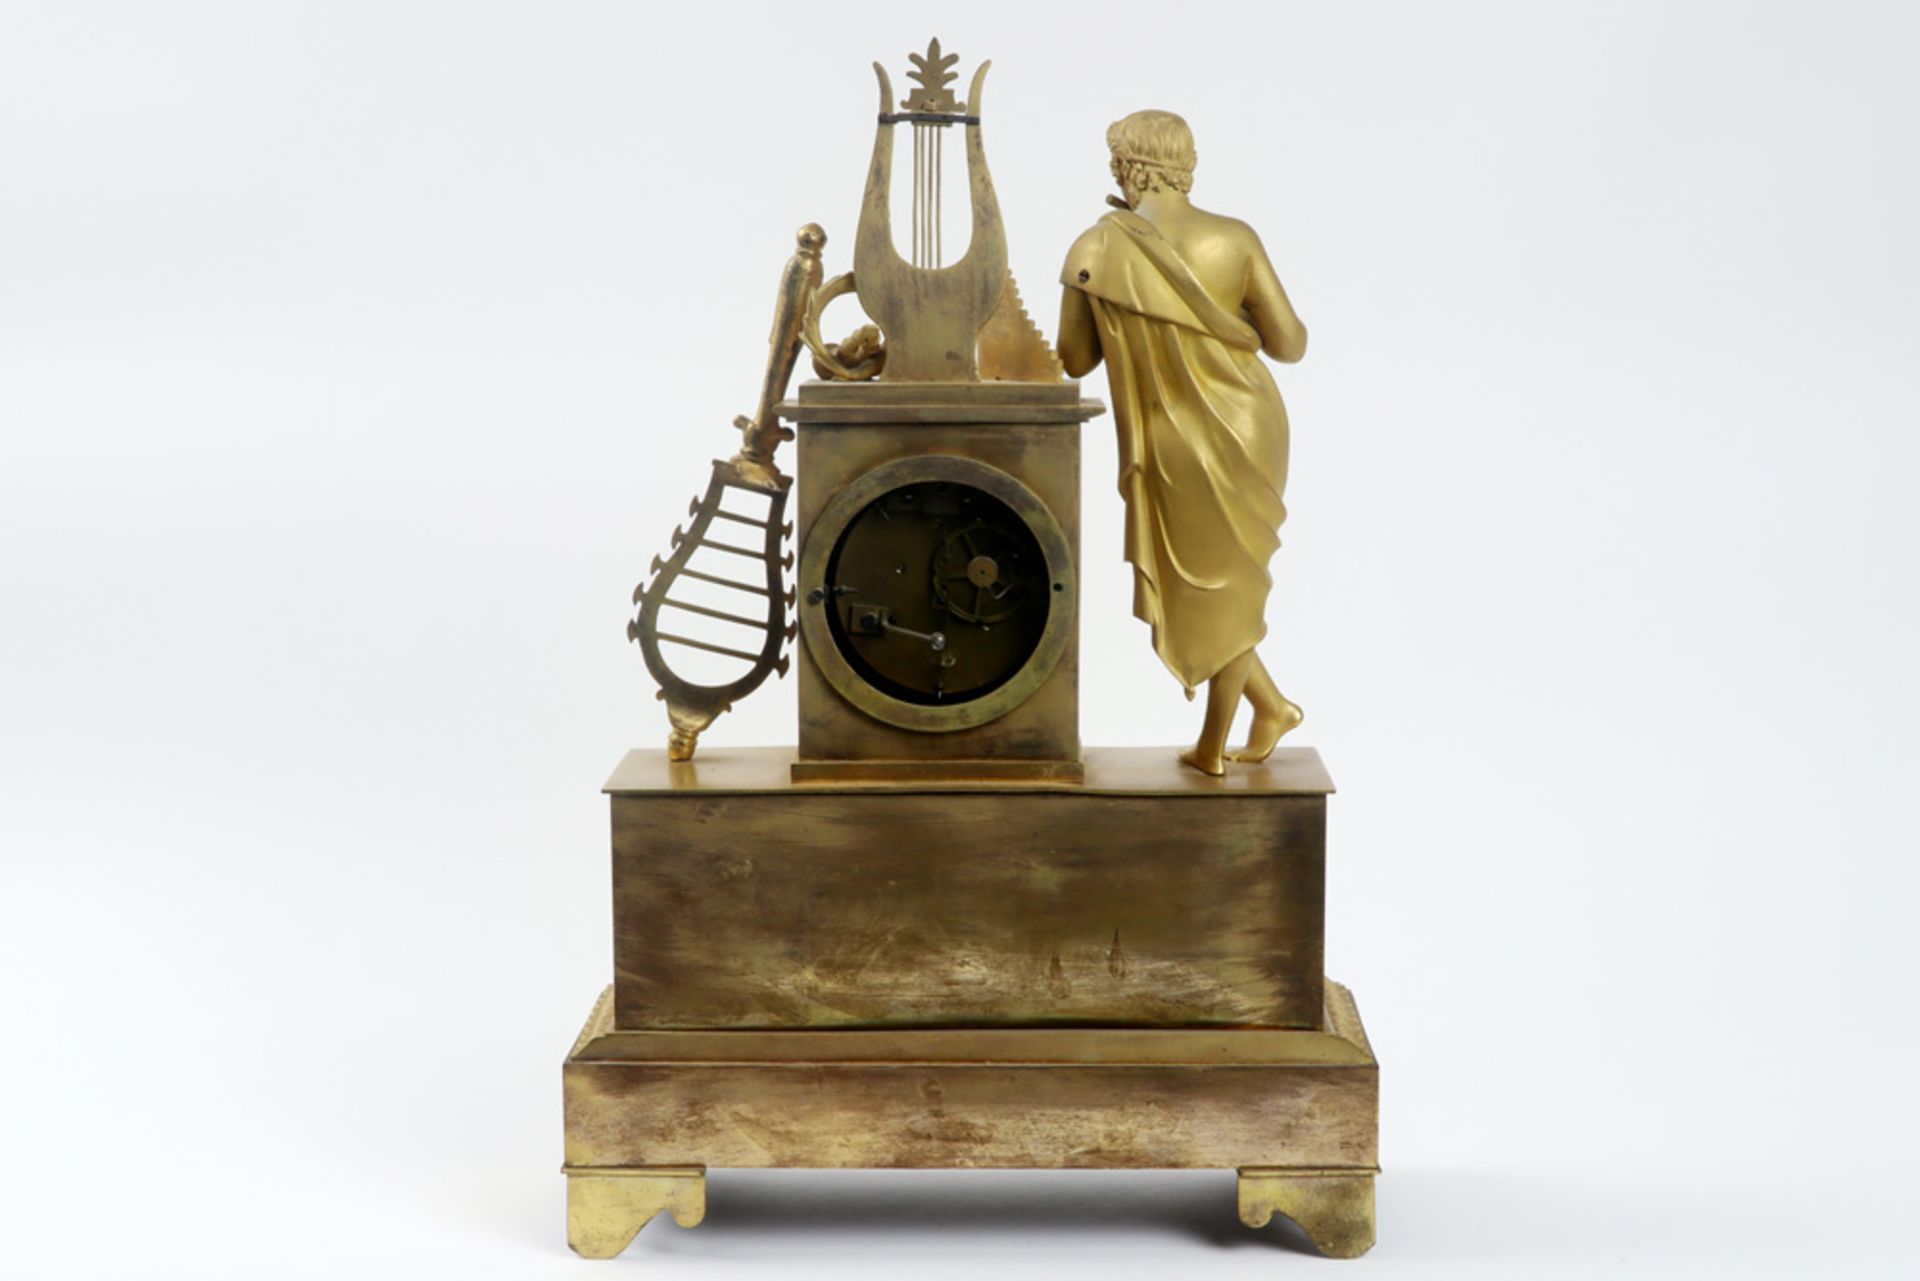 19th Cent. Empire style ormulu clock with its case in gilded bronze and with a "Pons 1823" signed - Image 2 of 3